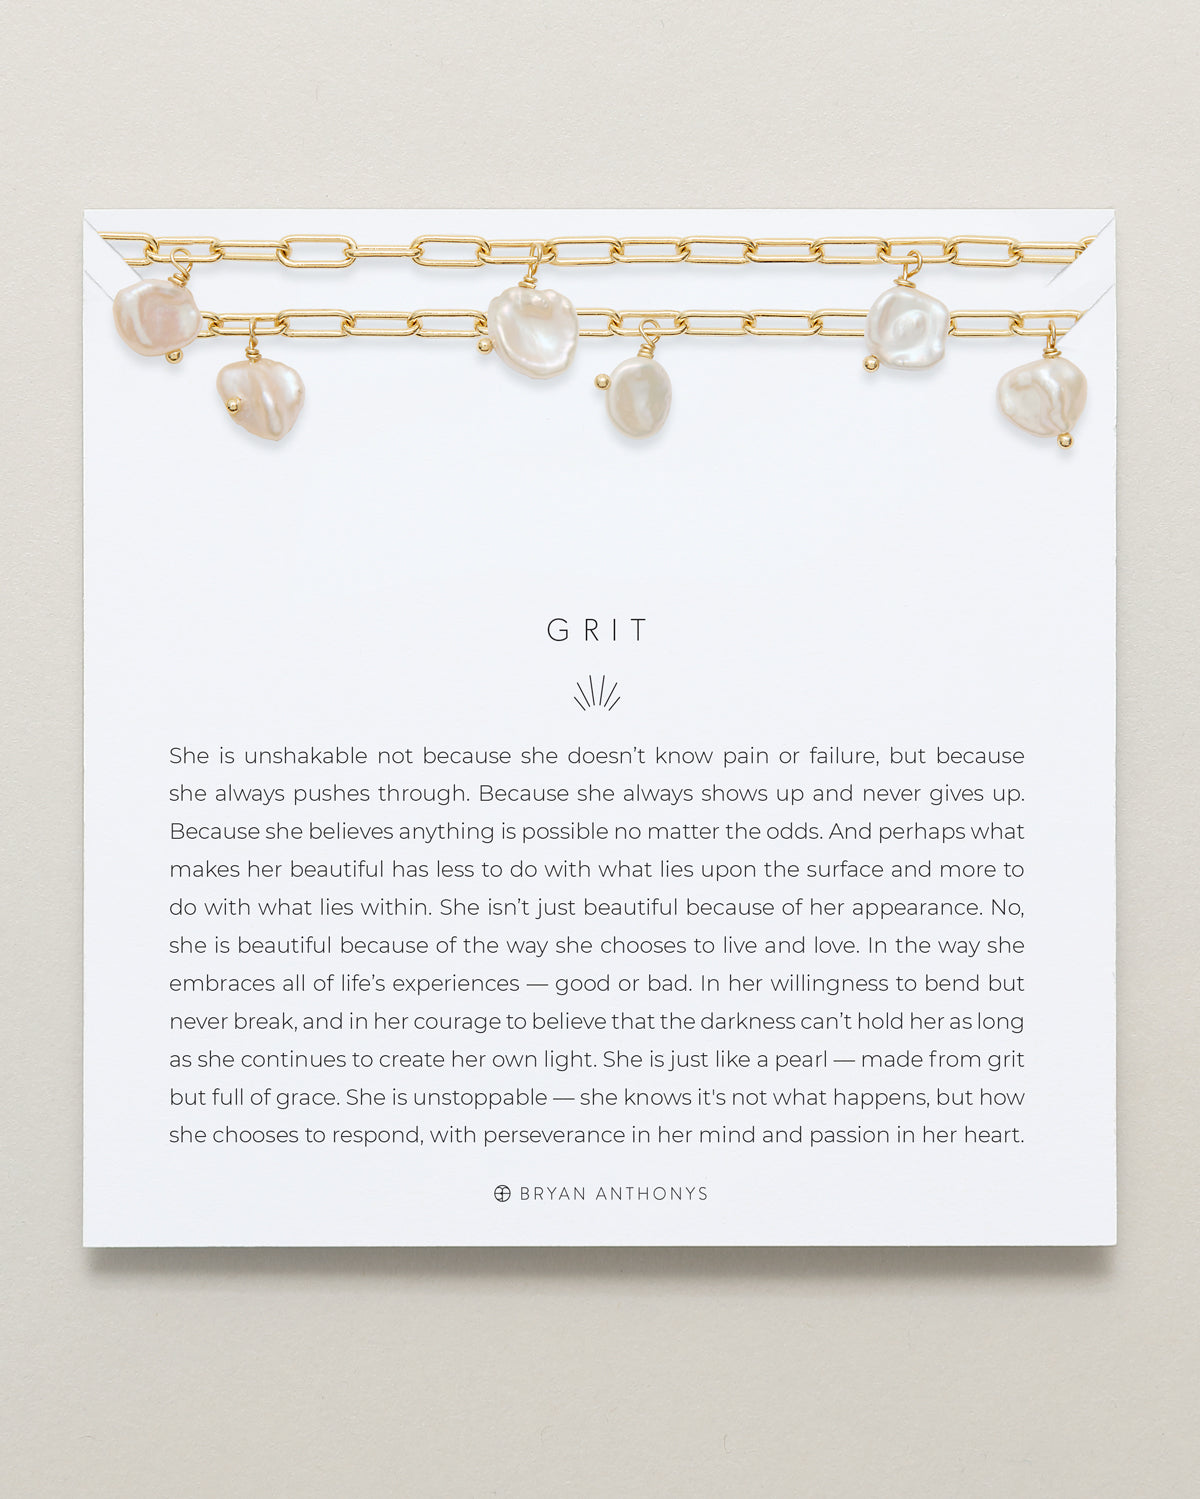  Bryan Anthonys Grit Paperclip Gold Chain Necklace Gold On Card